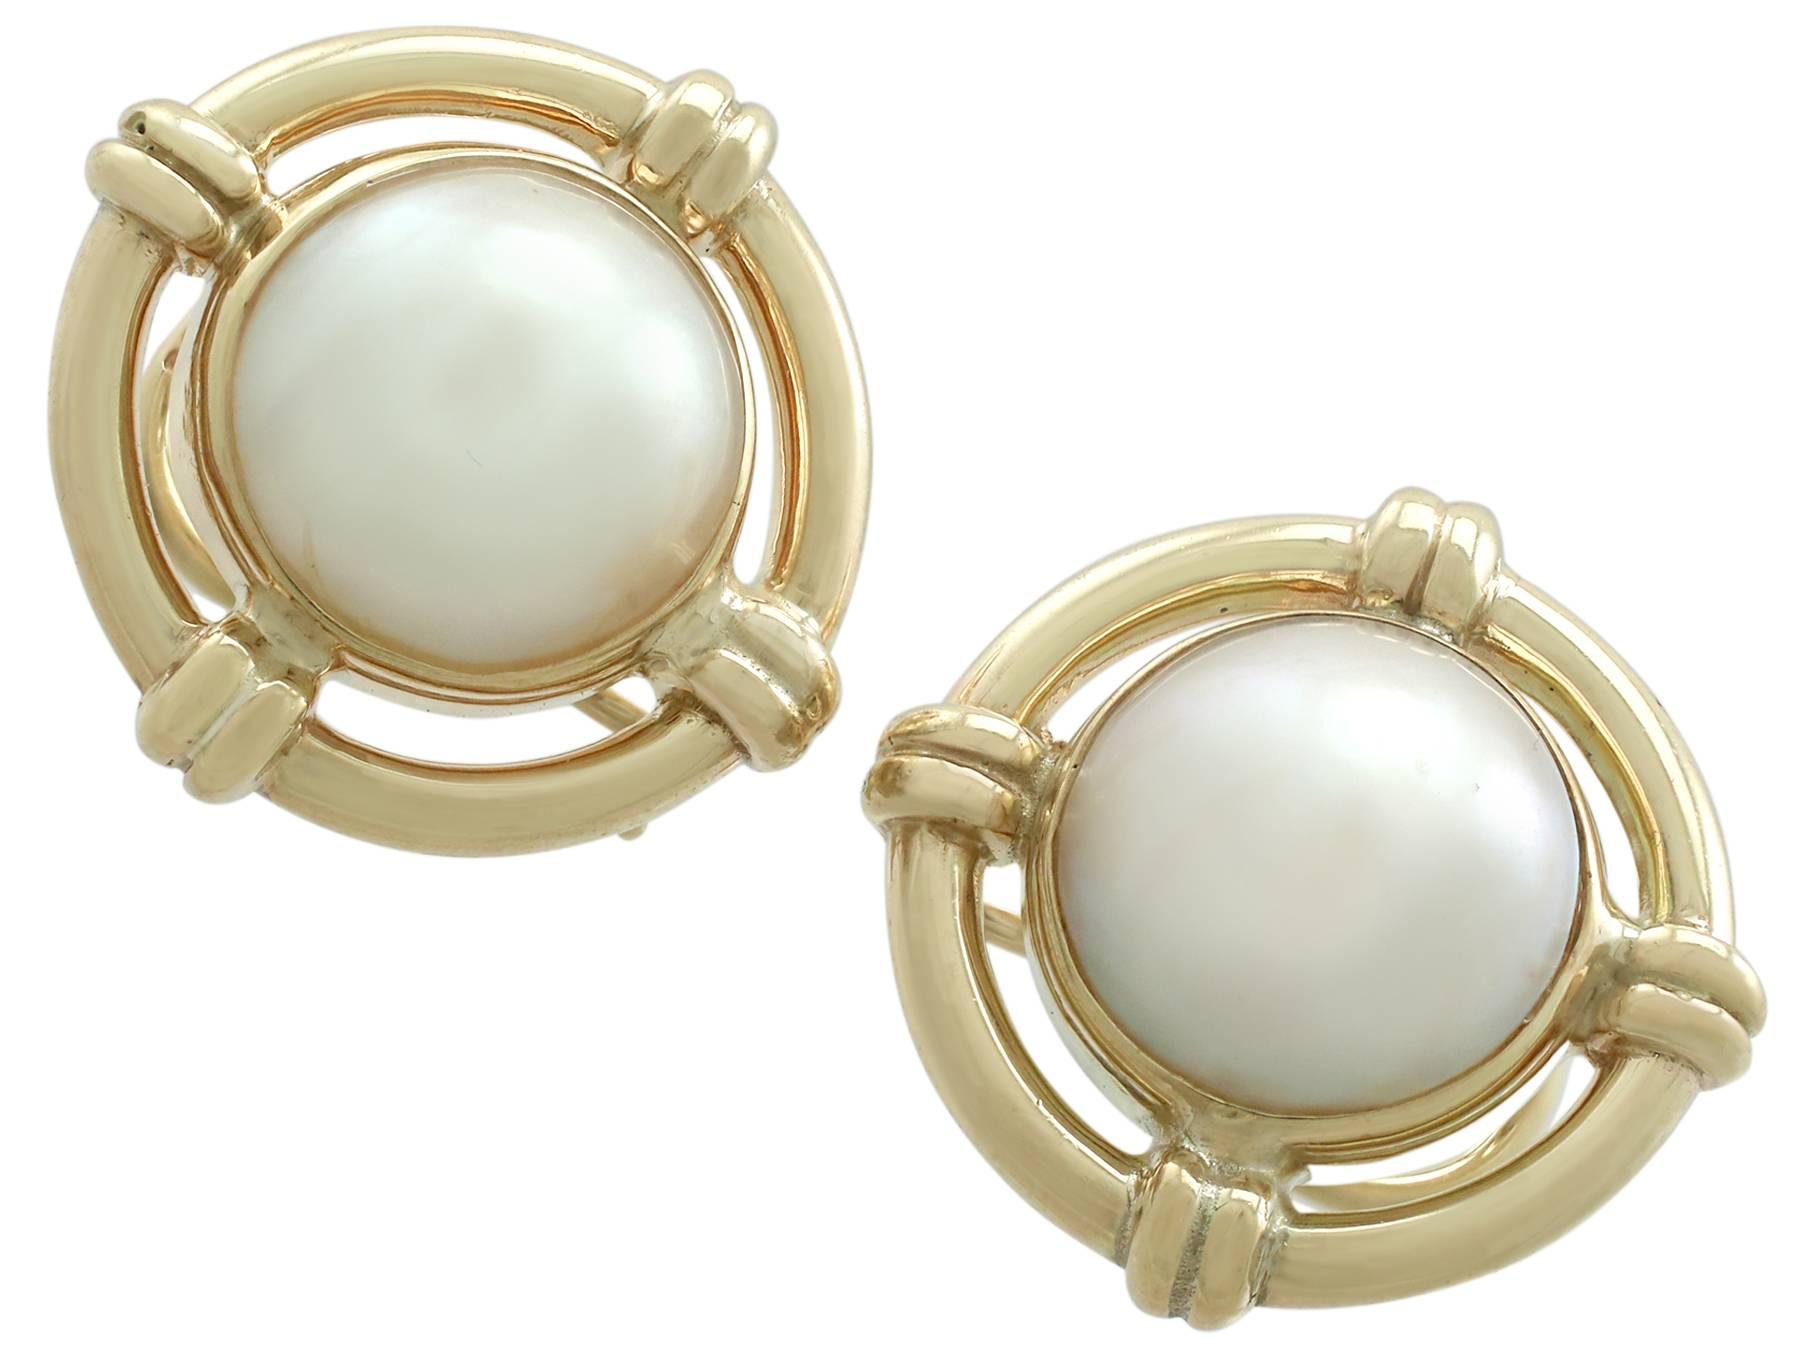 A fine and impressive pair of vintage mabe pearl and 9k yellow gold stud earrings; part of our diverse vintage jewellery and estate jewelry collections.

This fine and impressive mabe pearl earrings has been crafted in 9k yellow gold.

Each earring